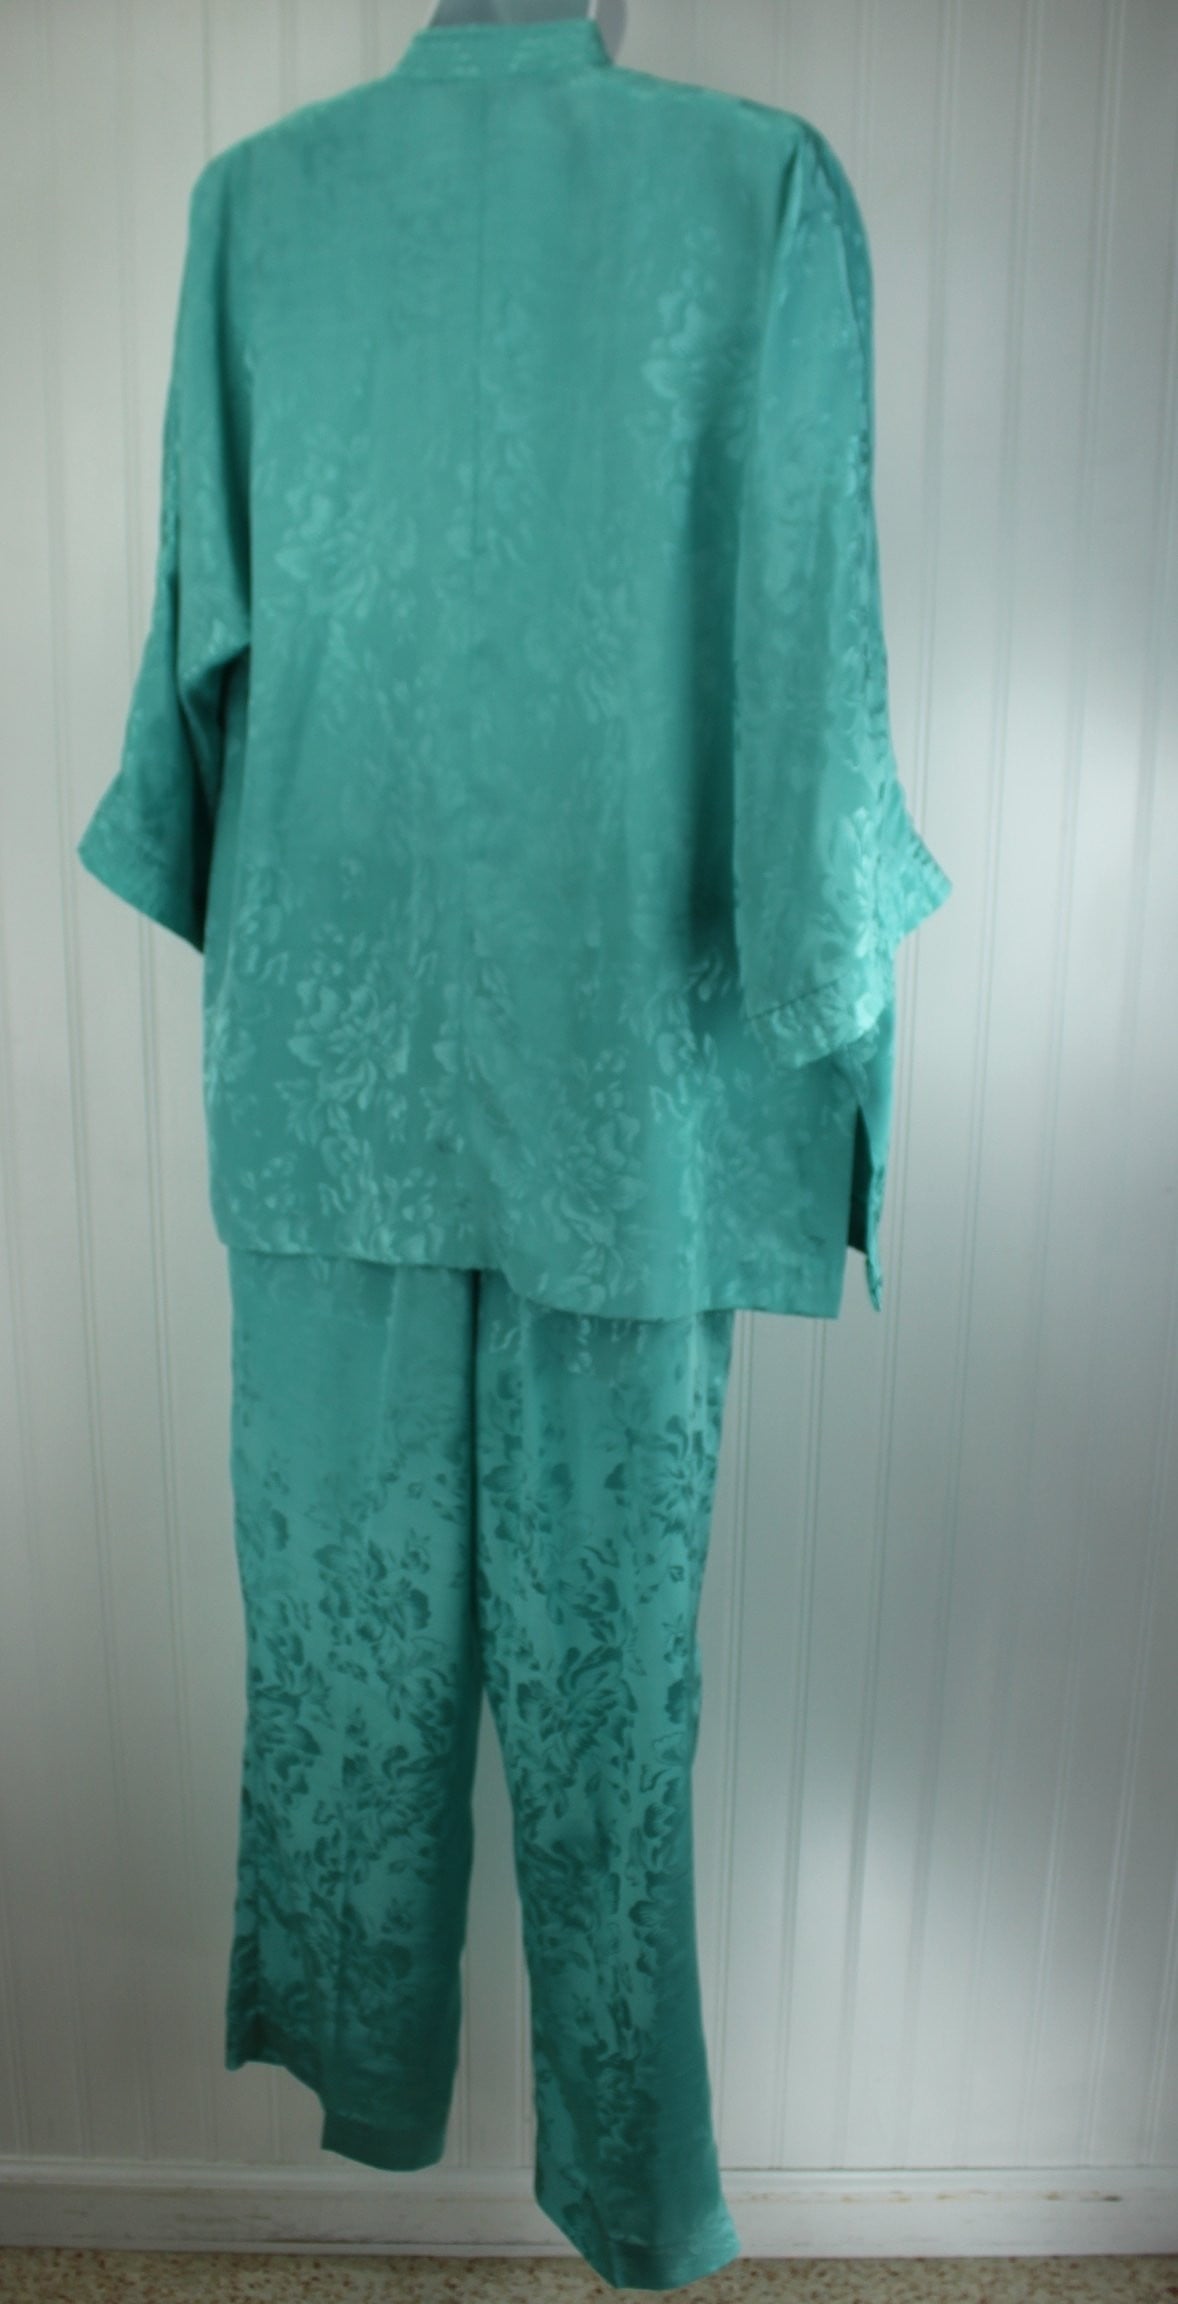 Polynesian Casuals Hawaii Charming Vintage Lounge Pants Suit  - Turquoise Aqua Polyester sensual feel